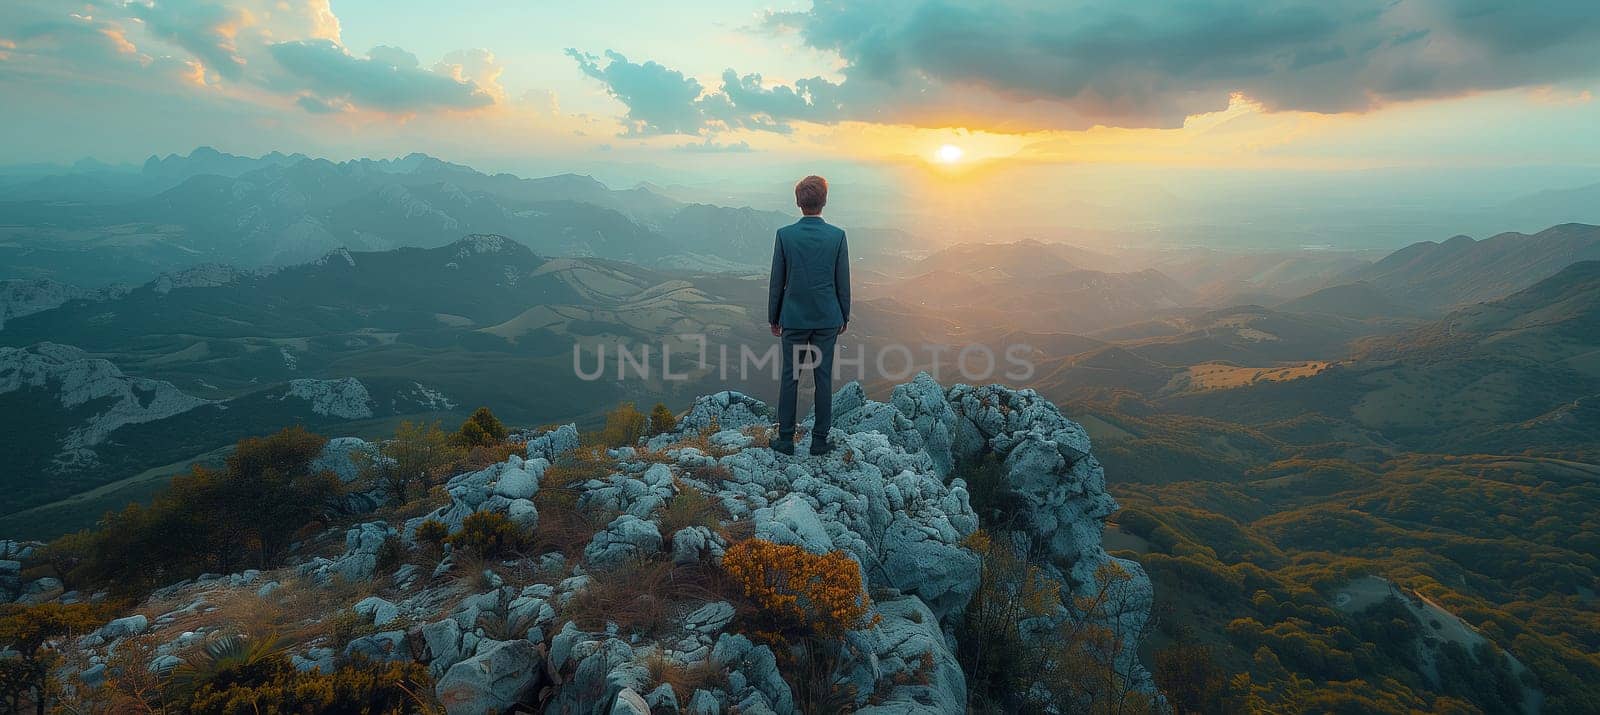 Man admires sunset from mountain top, surrounded by clouds and natural landscape by richwolf